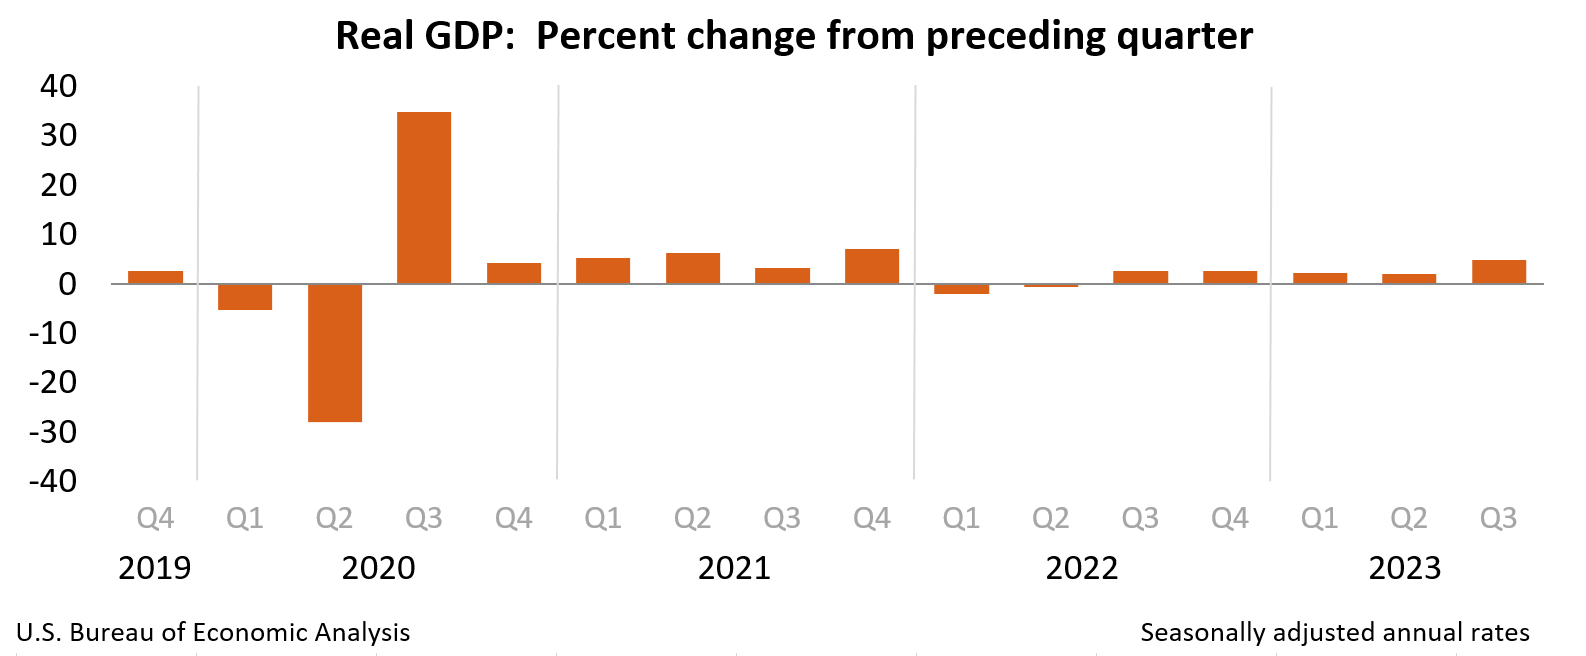 Real GDP: Percent change from preceding quarter